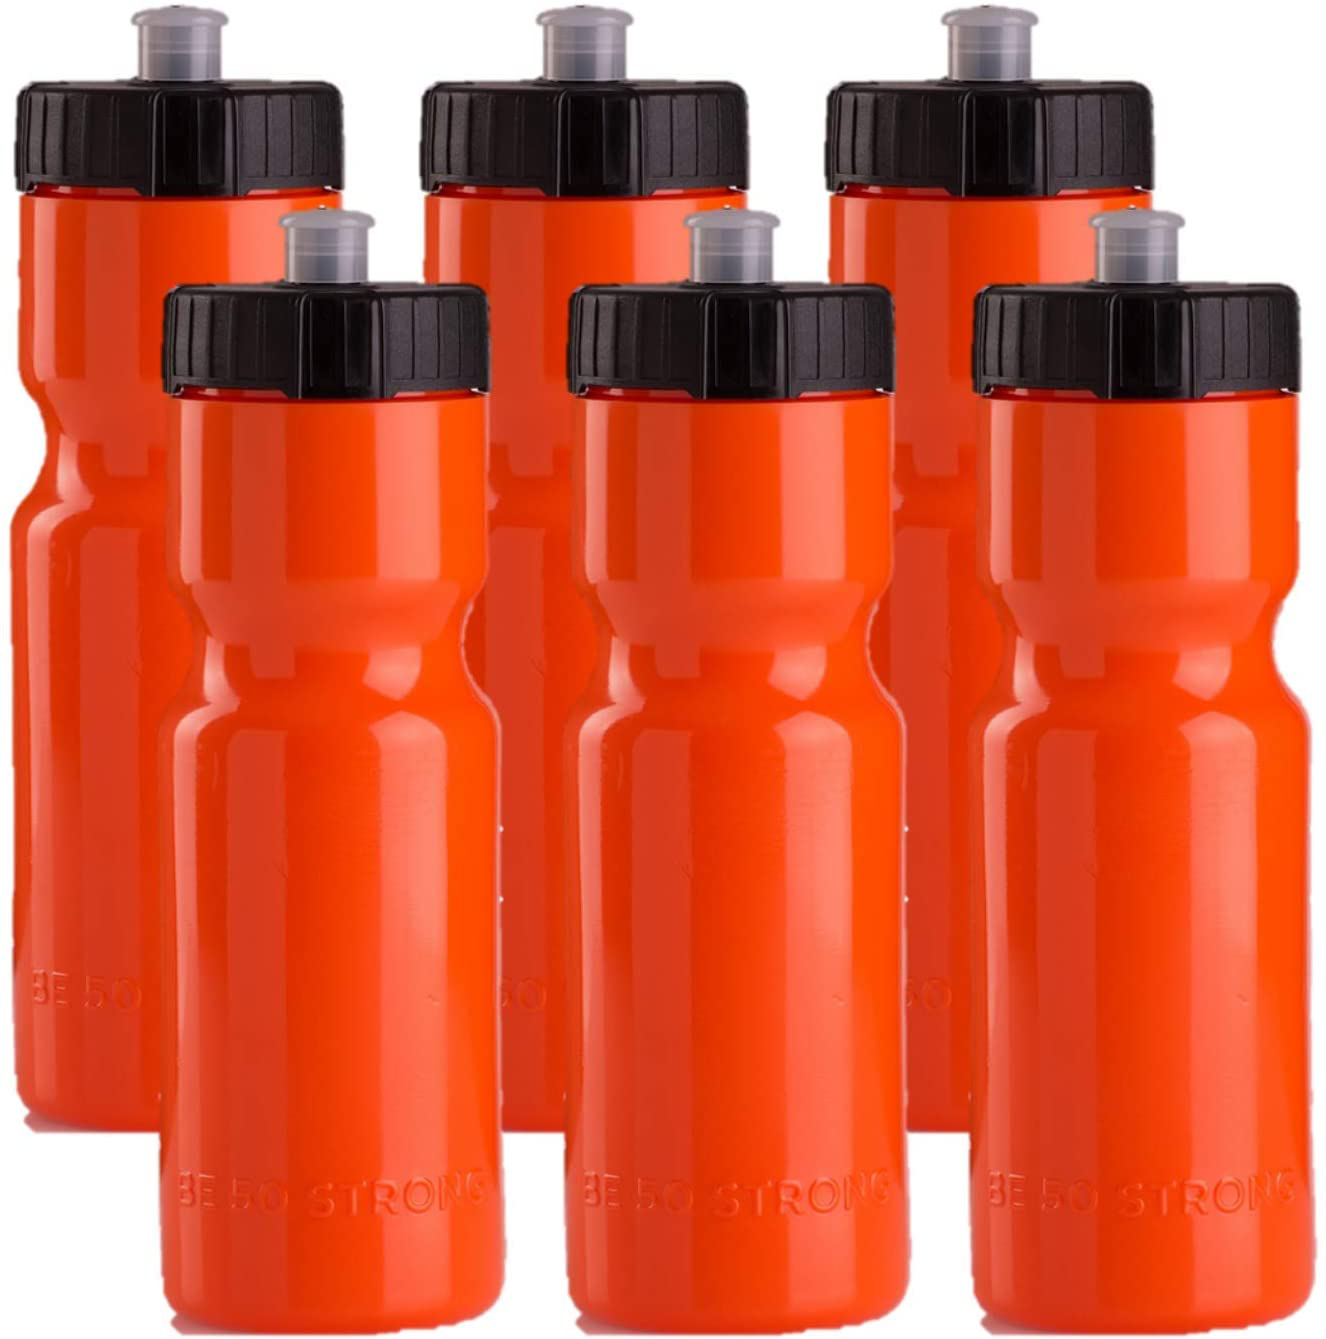 50 Strong 6-Pack of Sports Squeeze Water Bottles - 22 oz. BPA Free Bike & Sport Bottle with Easy Open Push/Pull Cap – Made in USA